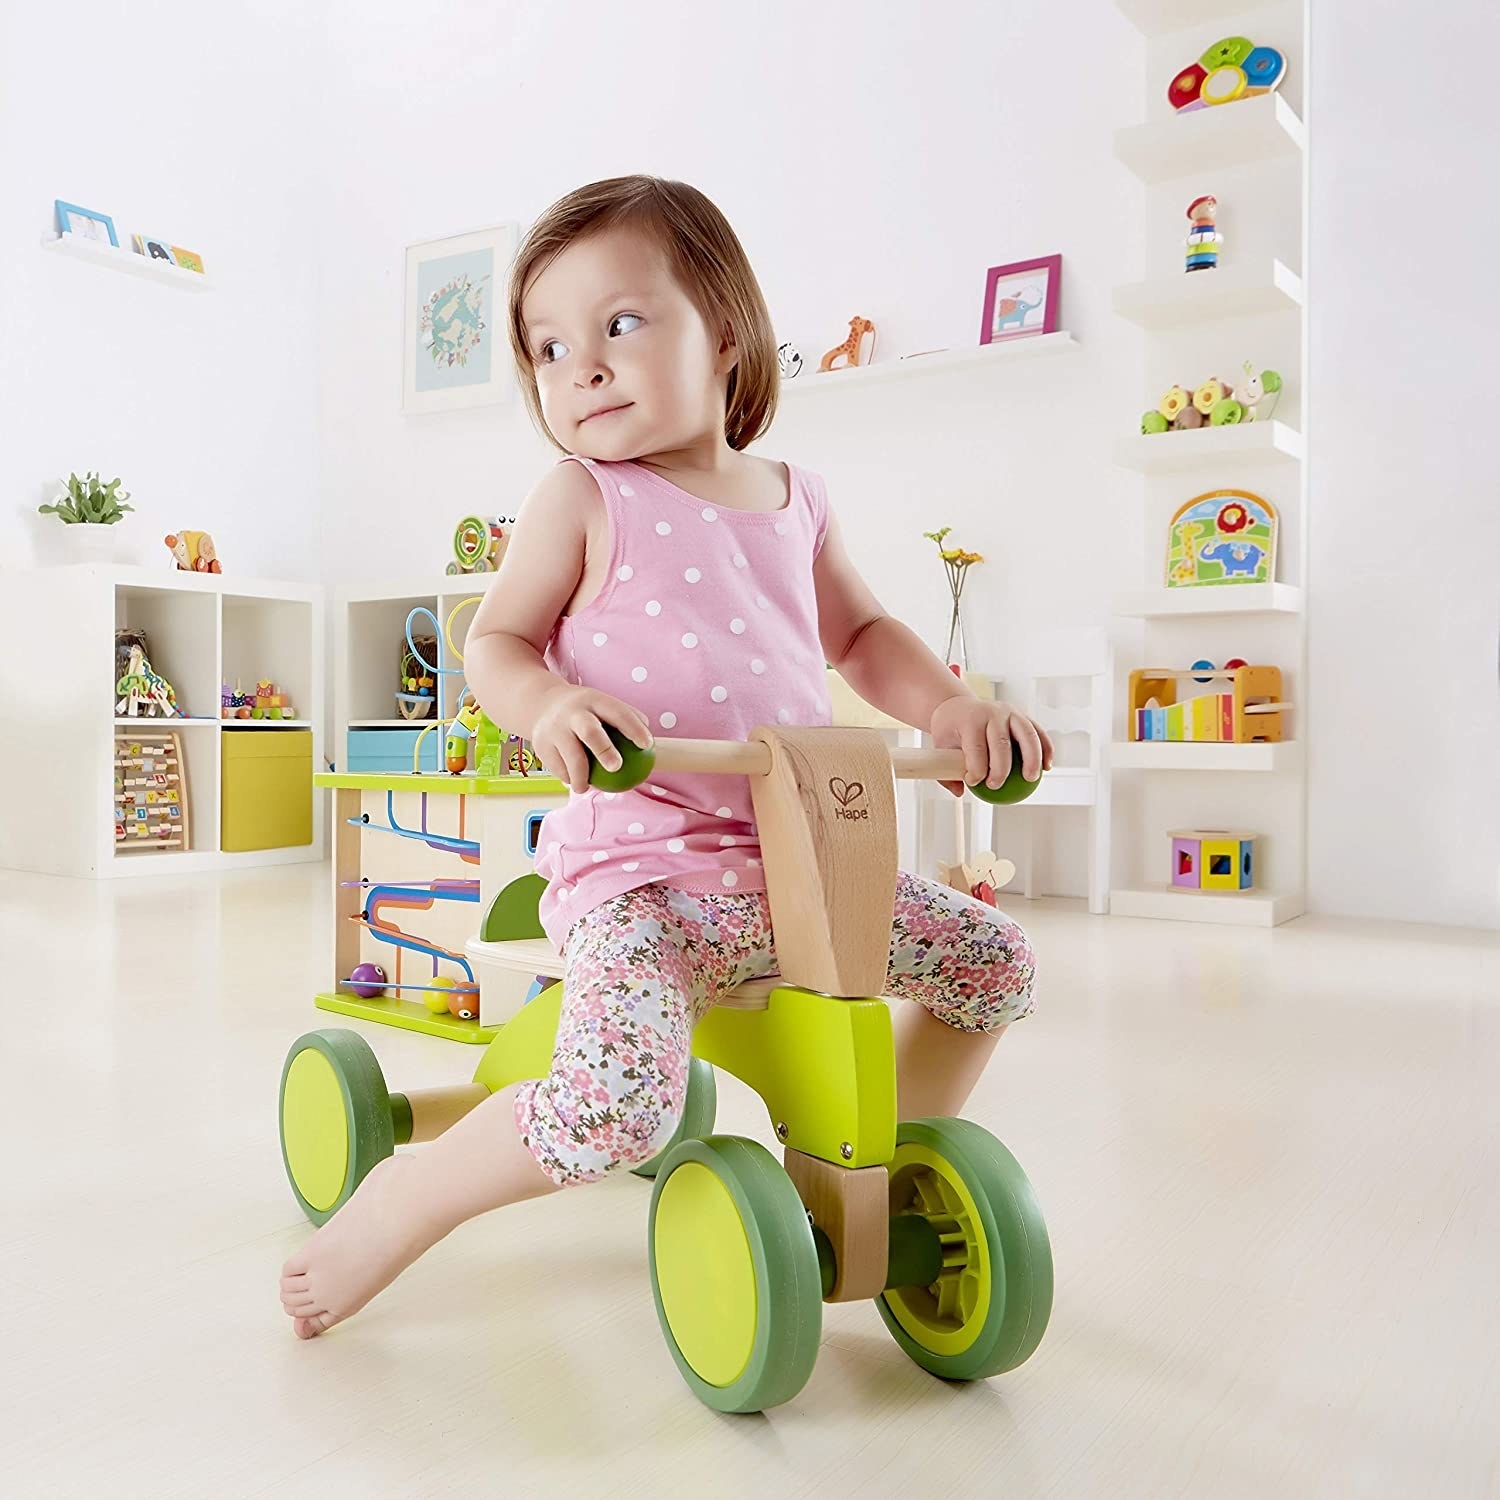 Cute Plastic Bike Tricycle with Push Handle for Dolls Kids G Kd 